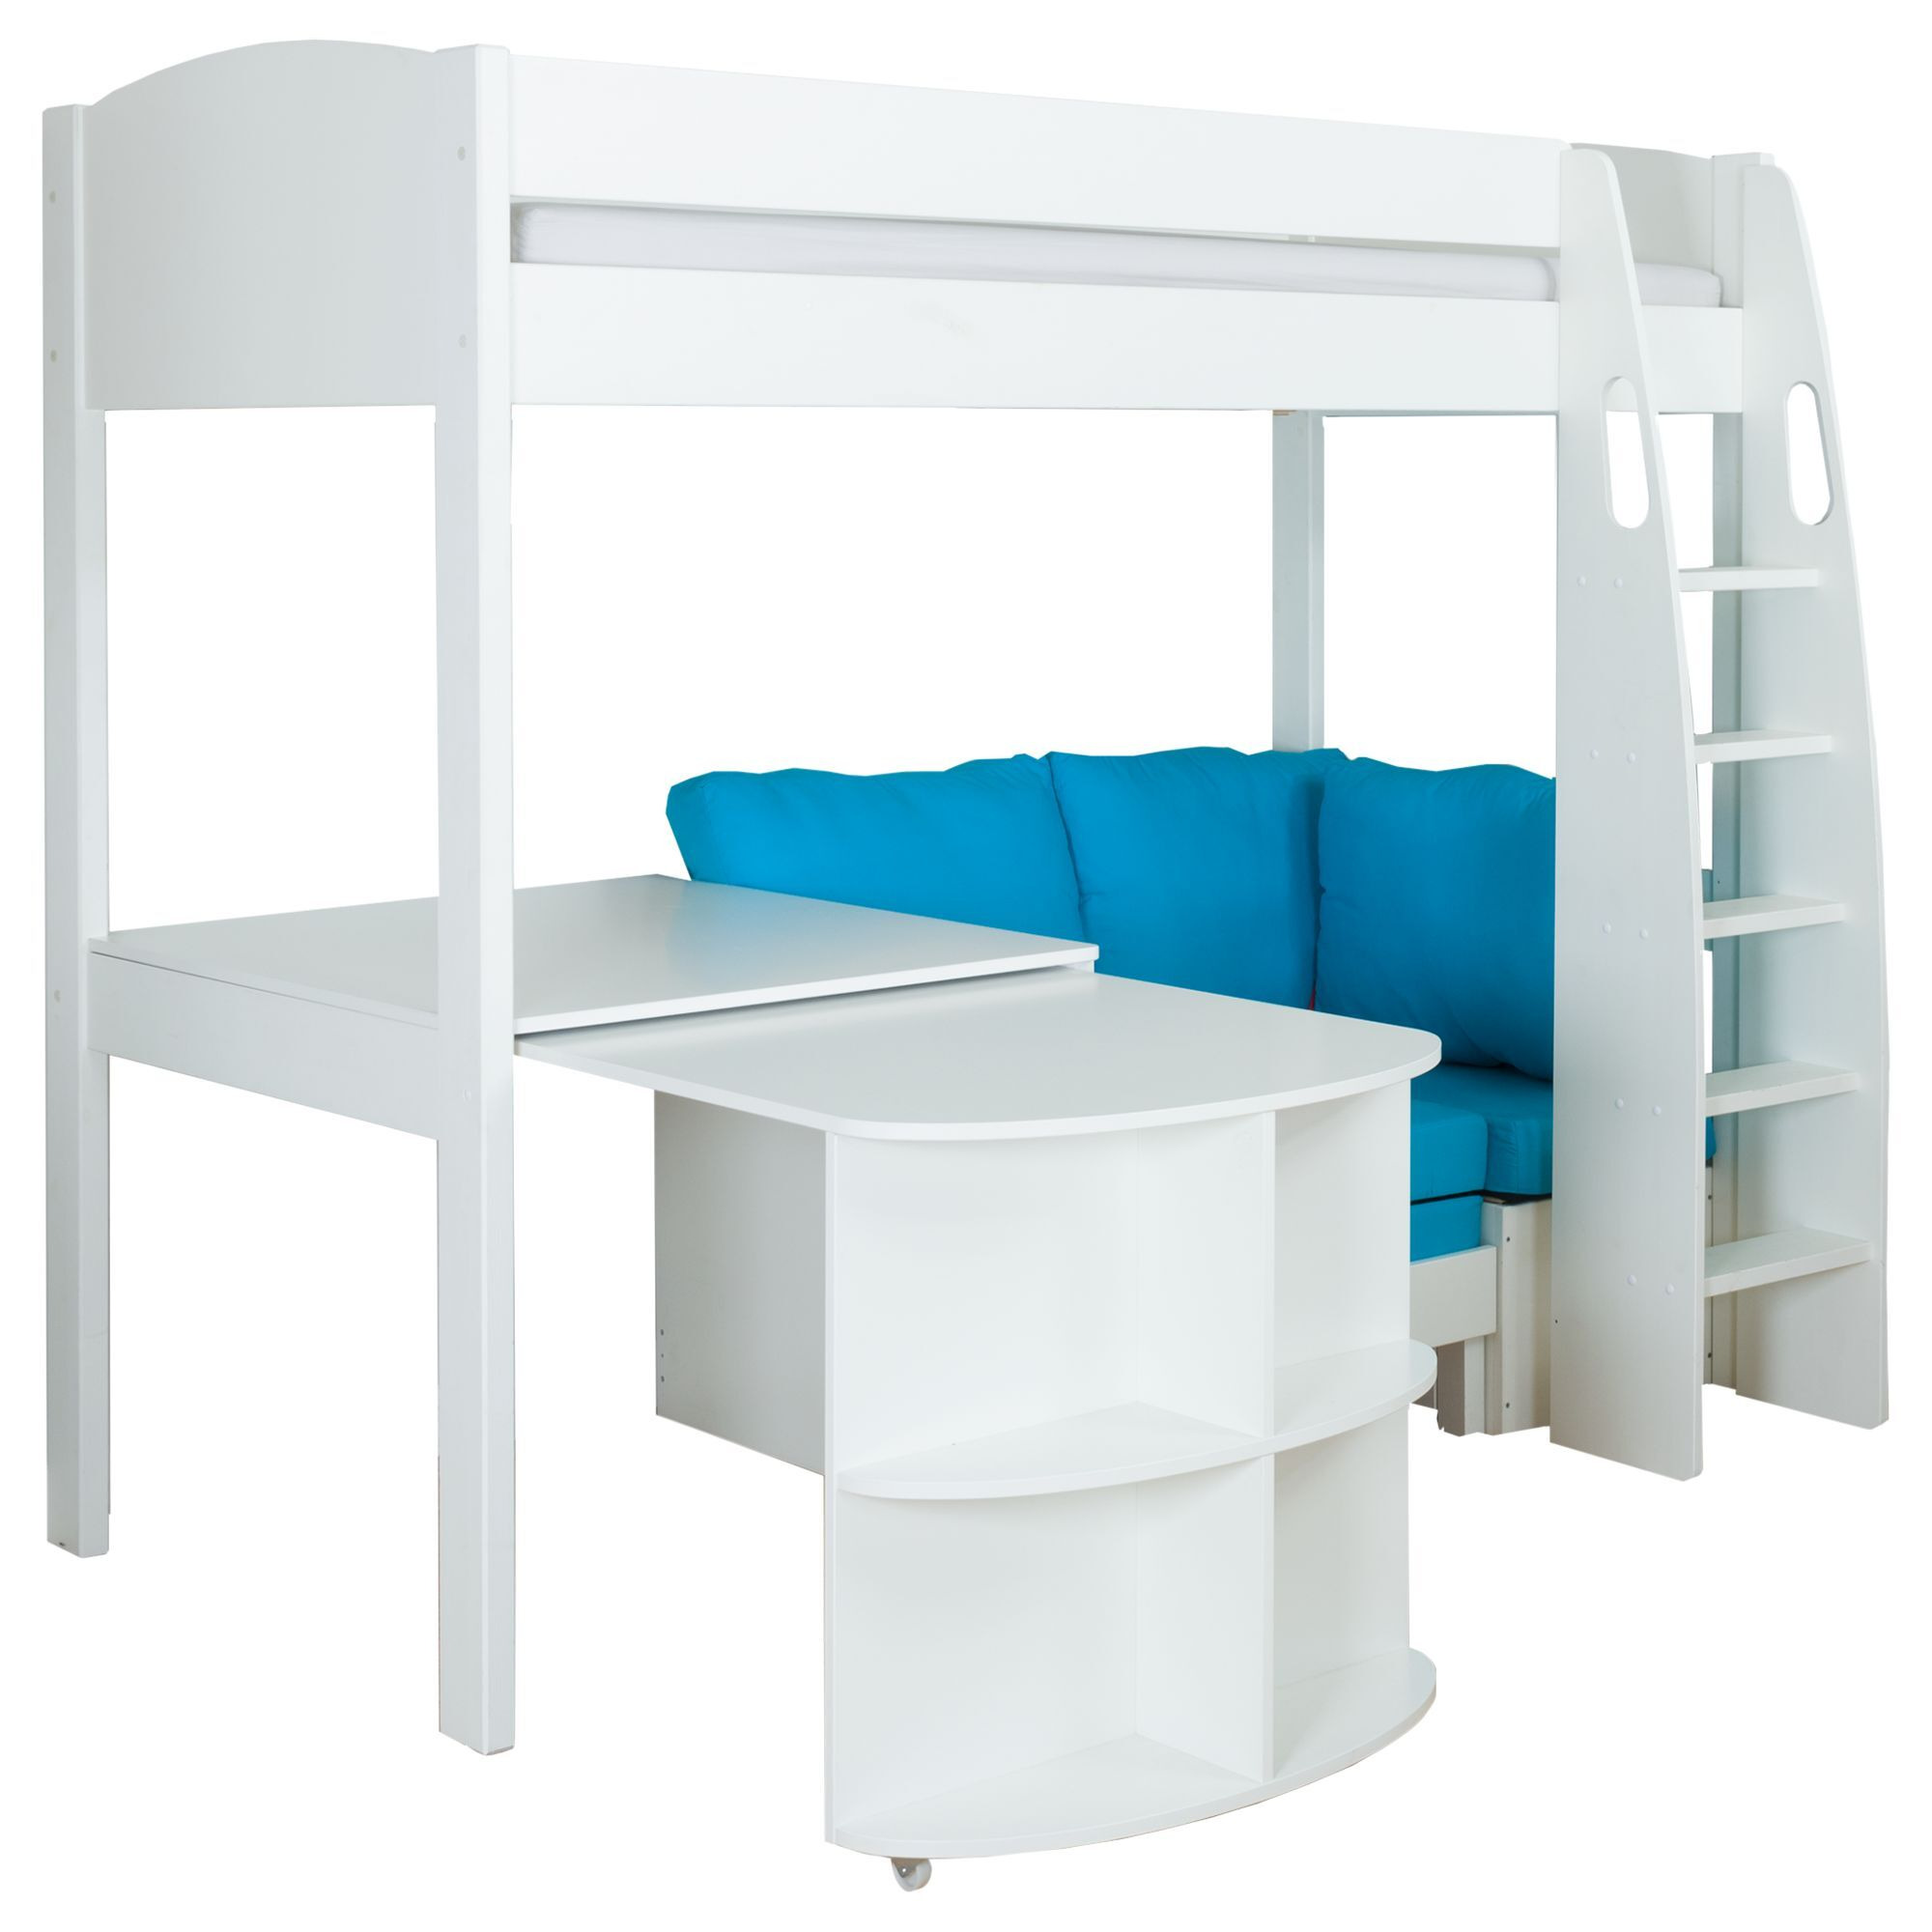 Stompa Uno S Plus High-Sleeper Bed with Pull-Out Desk and Chair Bed - image 1